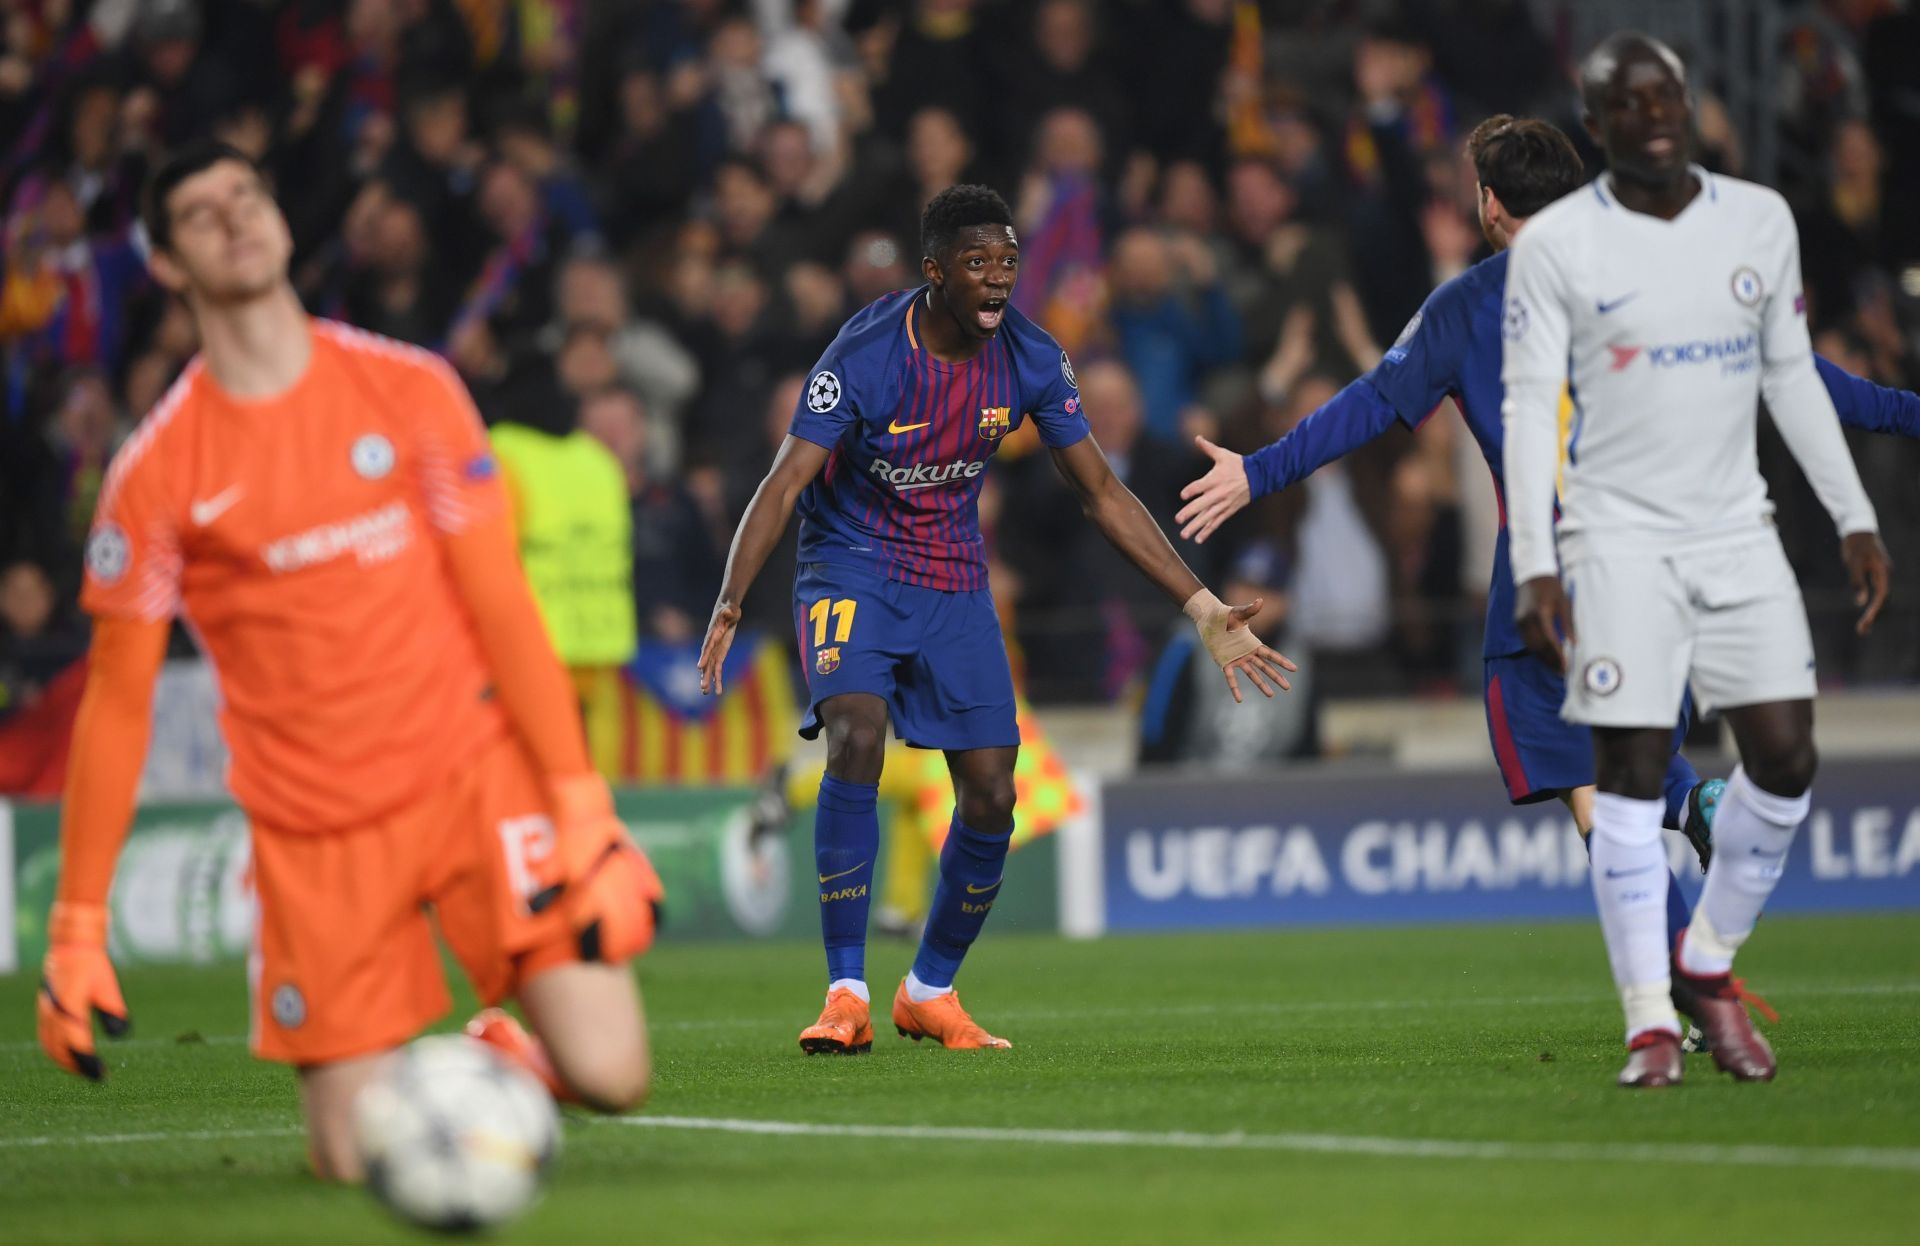 Barcelona star Ousmane Dembele was linked with a move to Stamford Bridge.